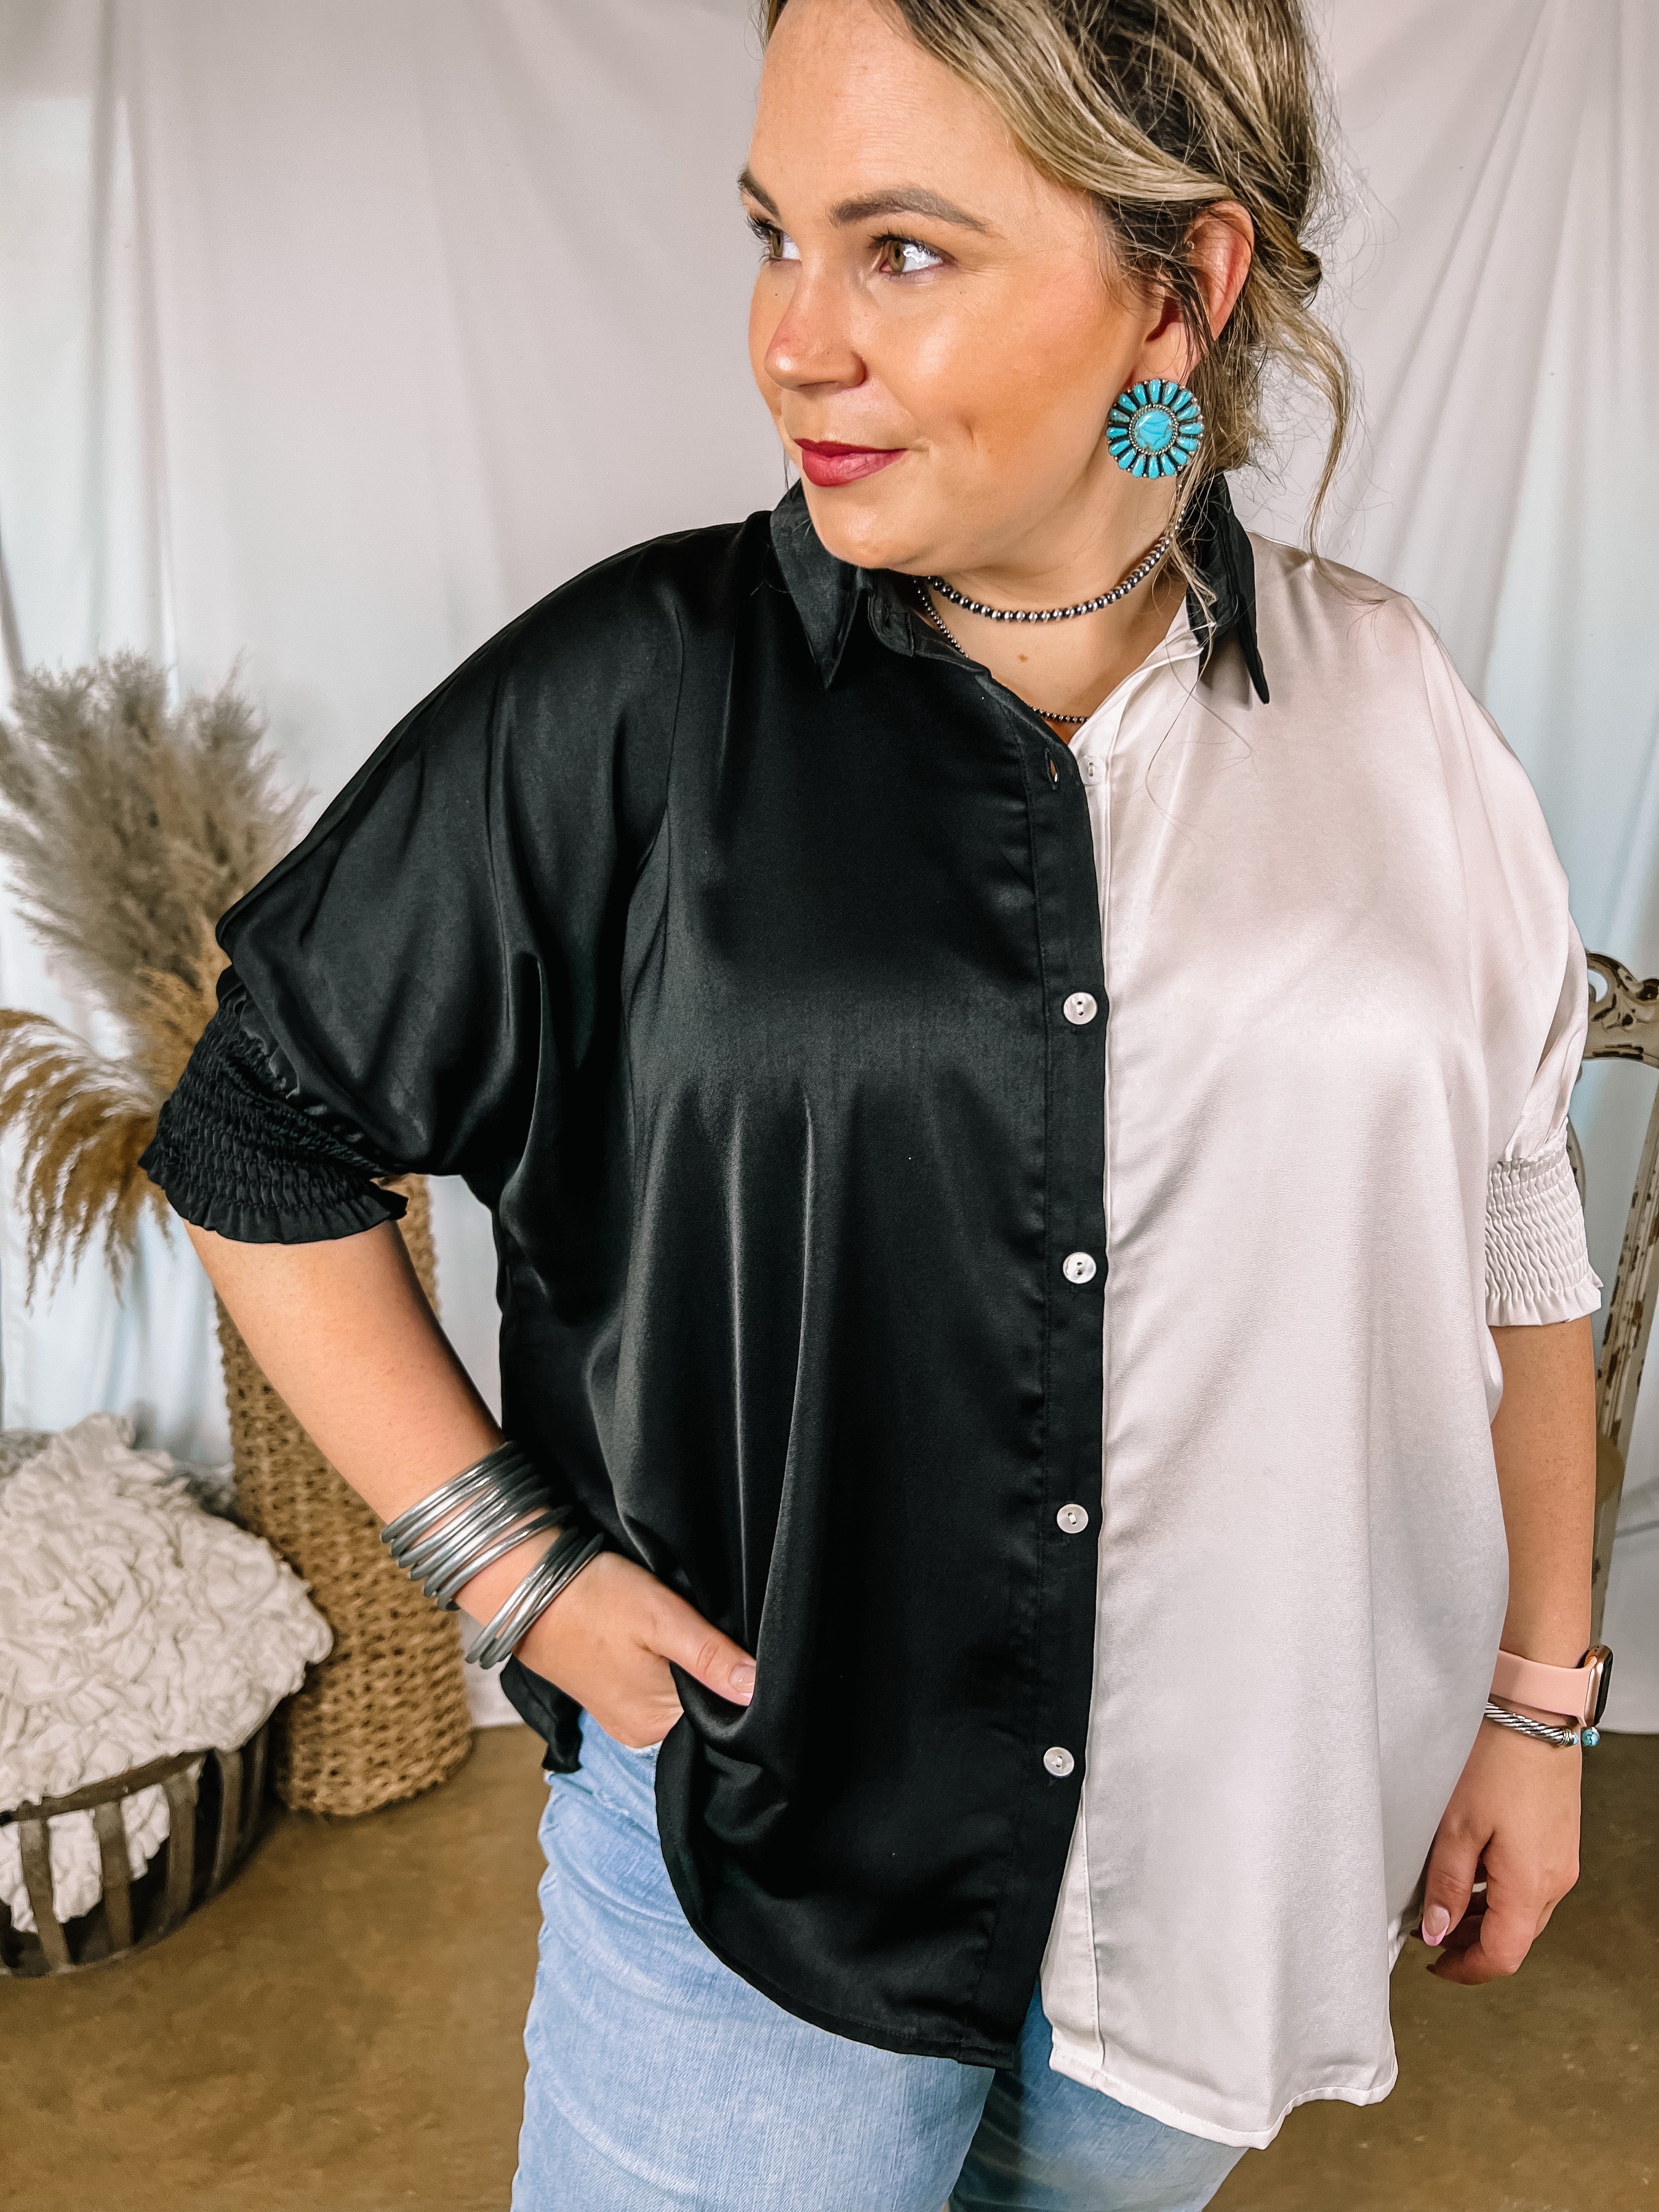 Major Glow Satin Smocked 3/4 Sleeve Button Up Blouse in Black and White - Giddy Up Glamour Boutique